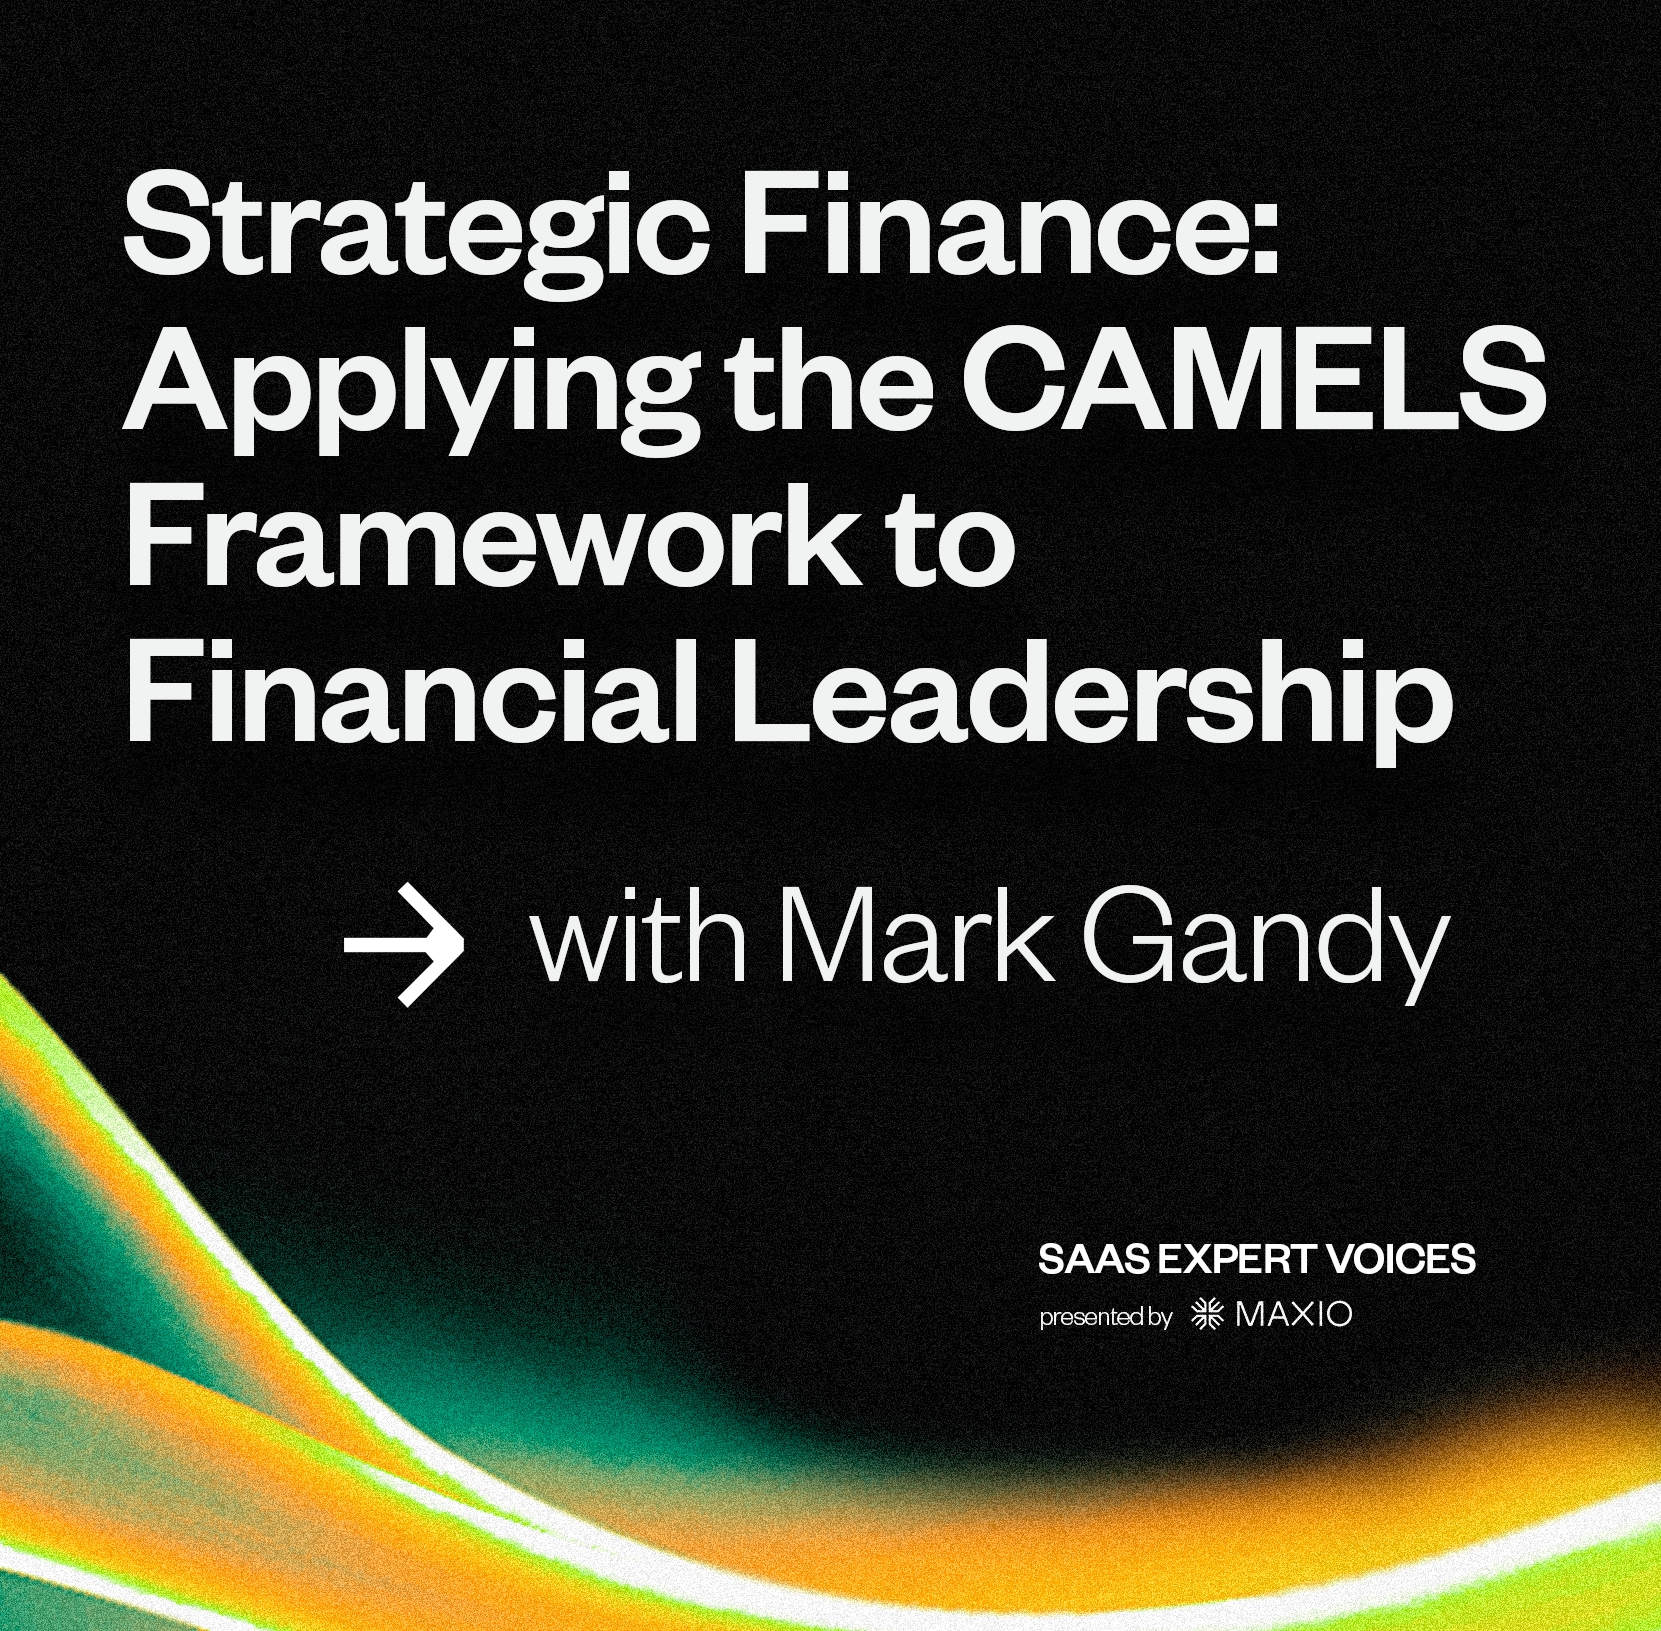 This week on the Expert Voices podcast, Randy Wootton, CEO of Maxio, speaks with Mark Gandy, CEO of G3CFO and the founder of the Financial Operating System. With an extensive career that started at KPMG, Mark has a background rich in accounting and financial expertise. Randy and Mark discuss the importance of a financial operating system and how it can help businesses get unstuck. Mark shares his insights on the CAMELS system, which stands for capital, asset quality, management, earnings, liquidity planning, and sensitivity to market risk. Listen this week as Randy and Mark explore growth trajectories, operational successes, and future relevance for CFOs in an ever-changing market landscape.